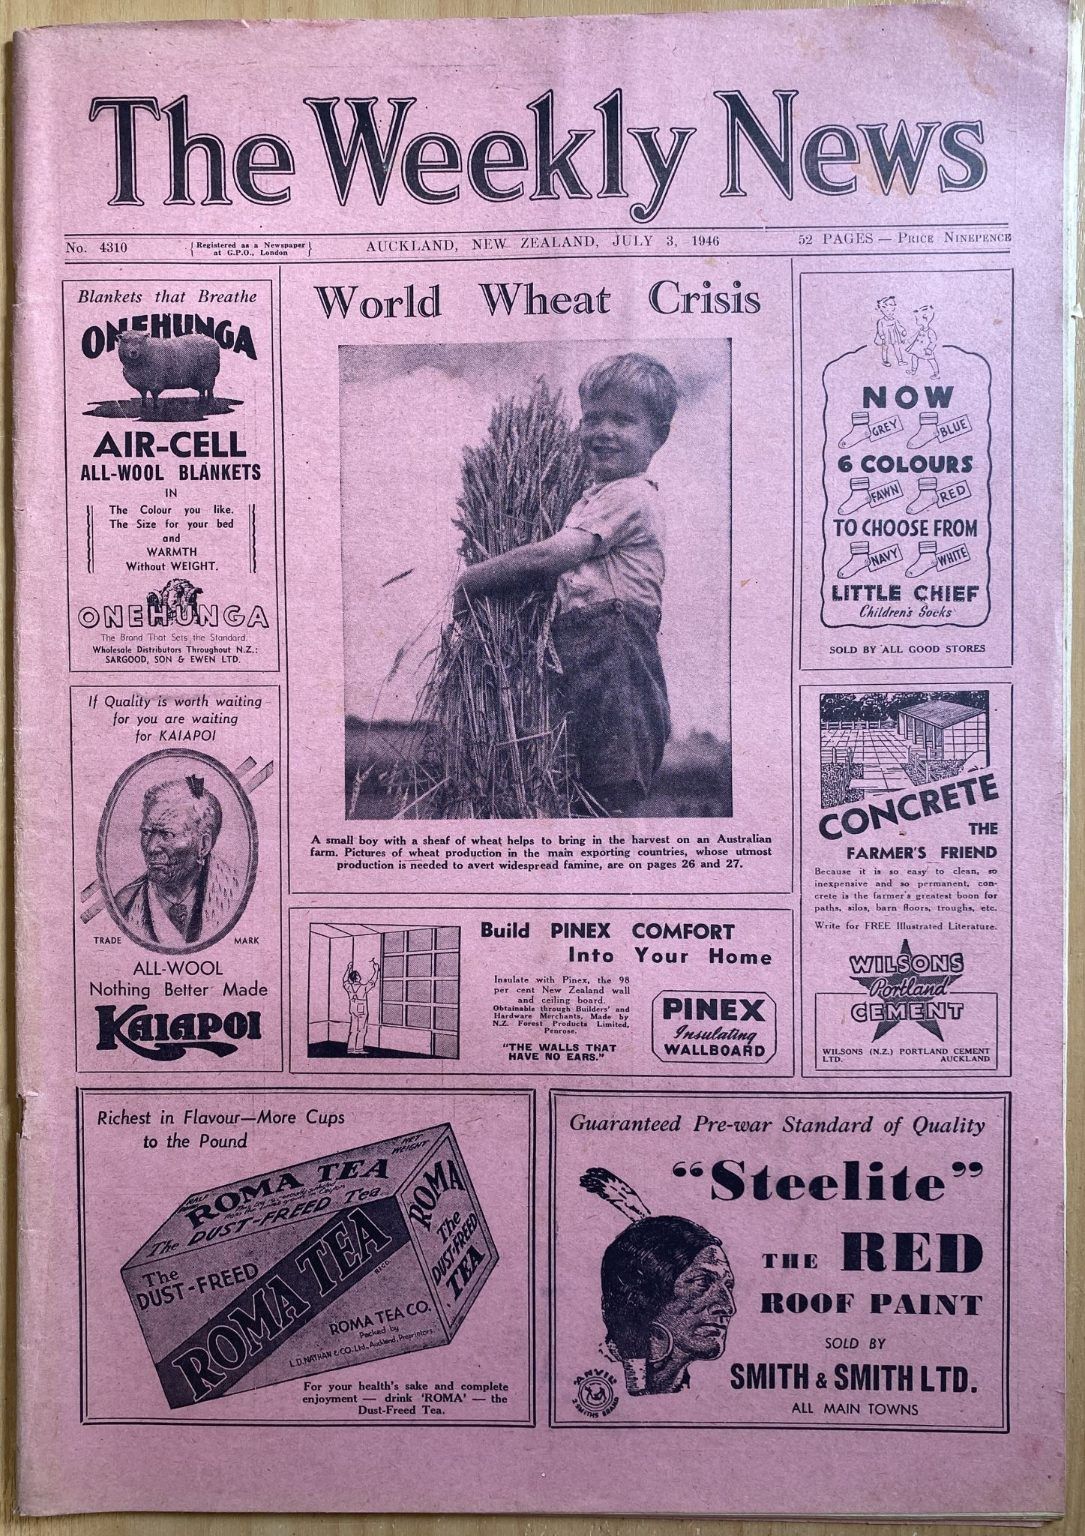 OLD NEWSPAPER: The Weekly News - No. 4310, 3 July 1946